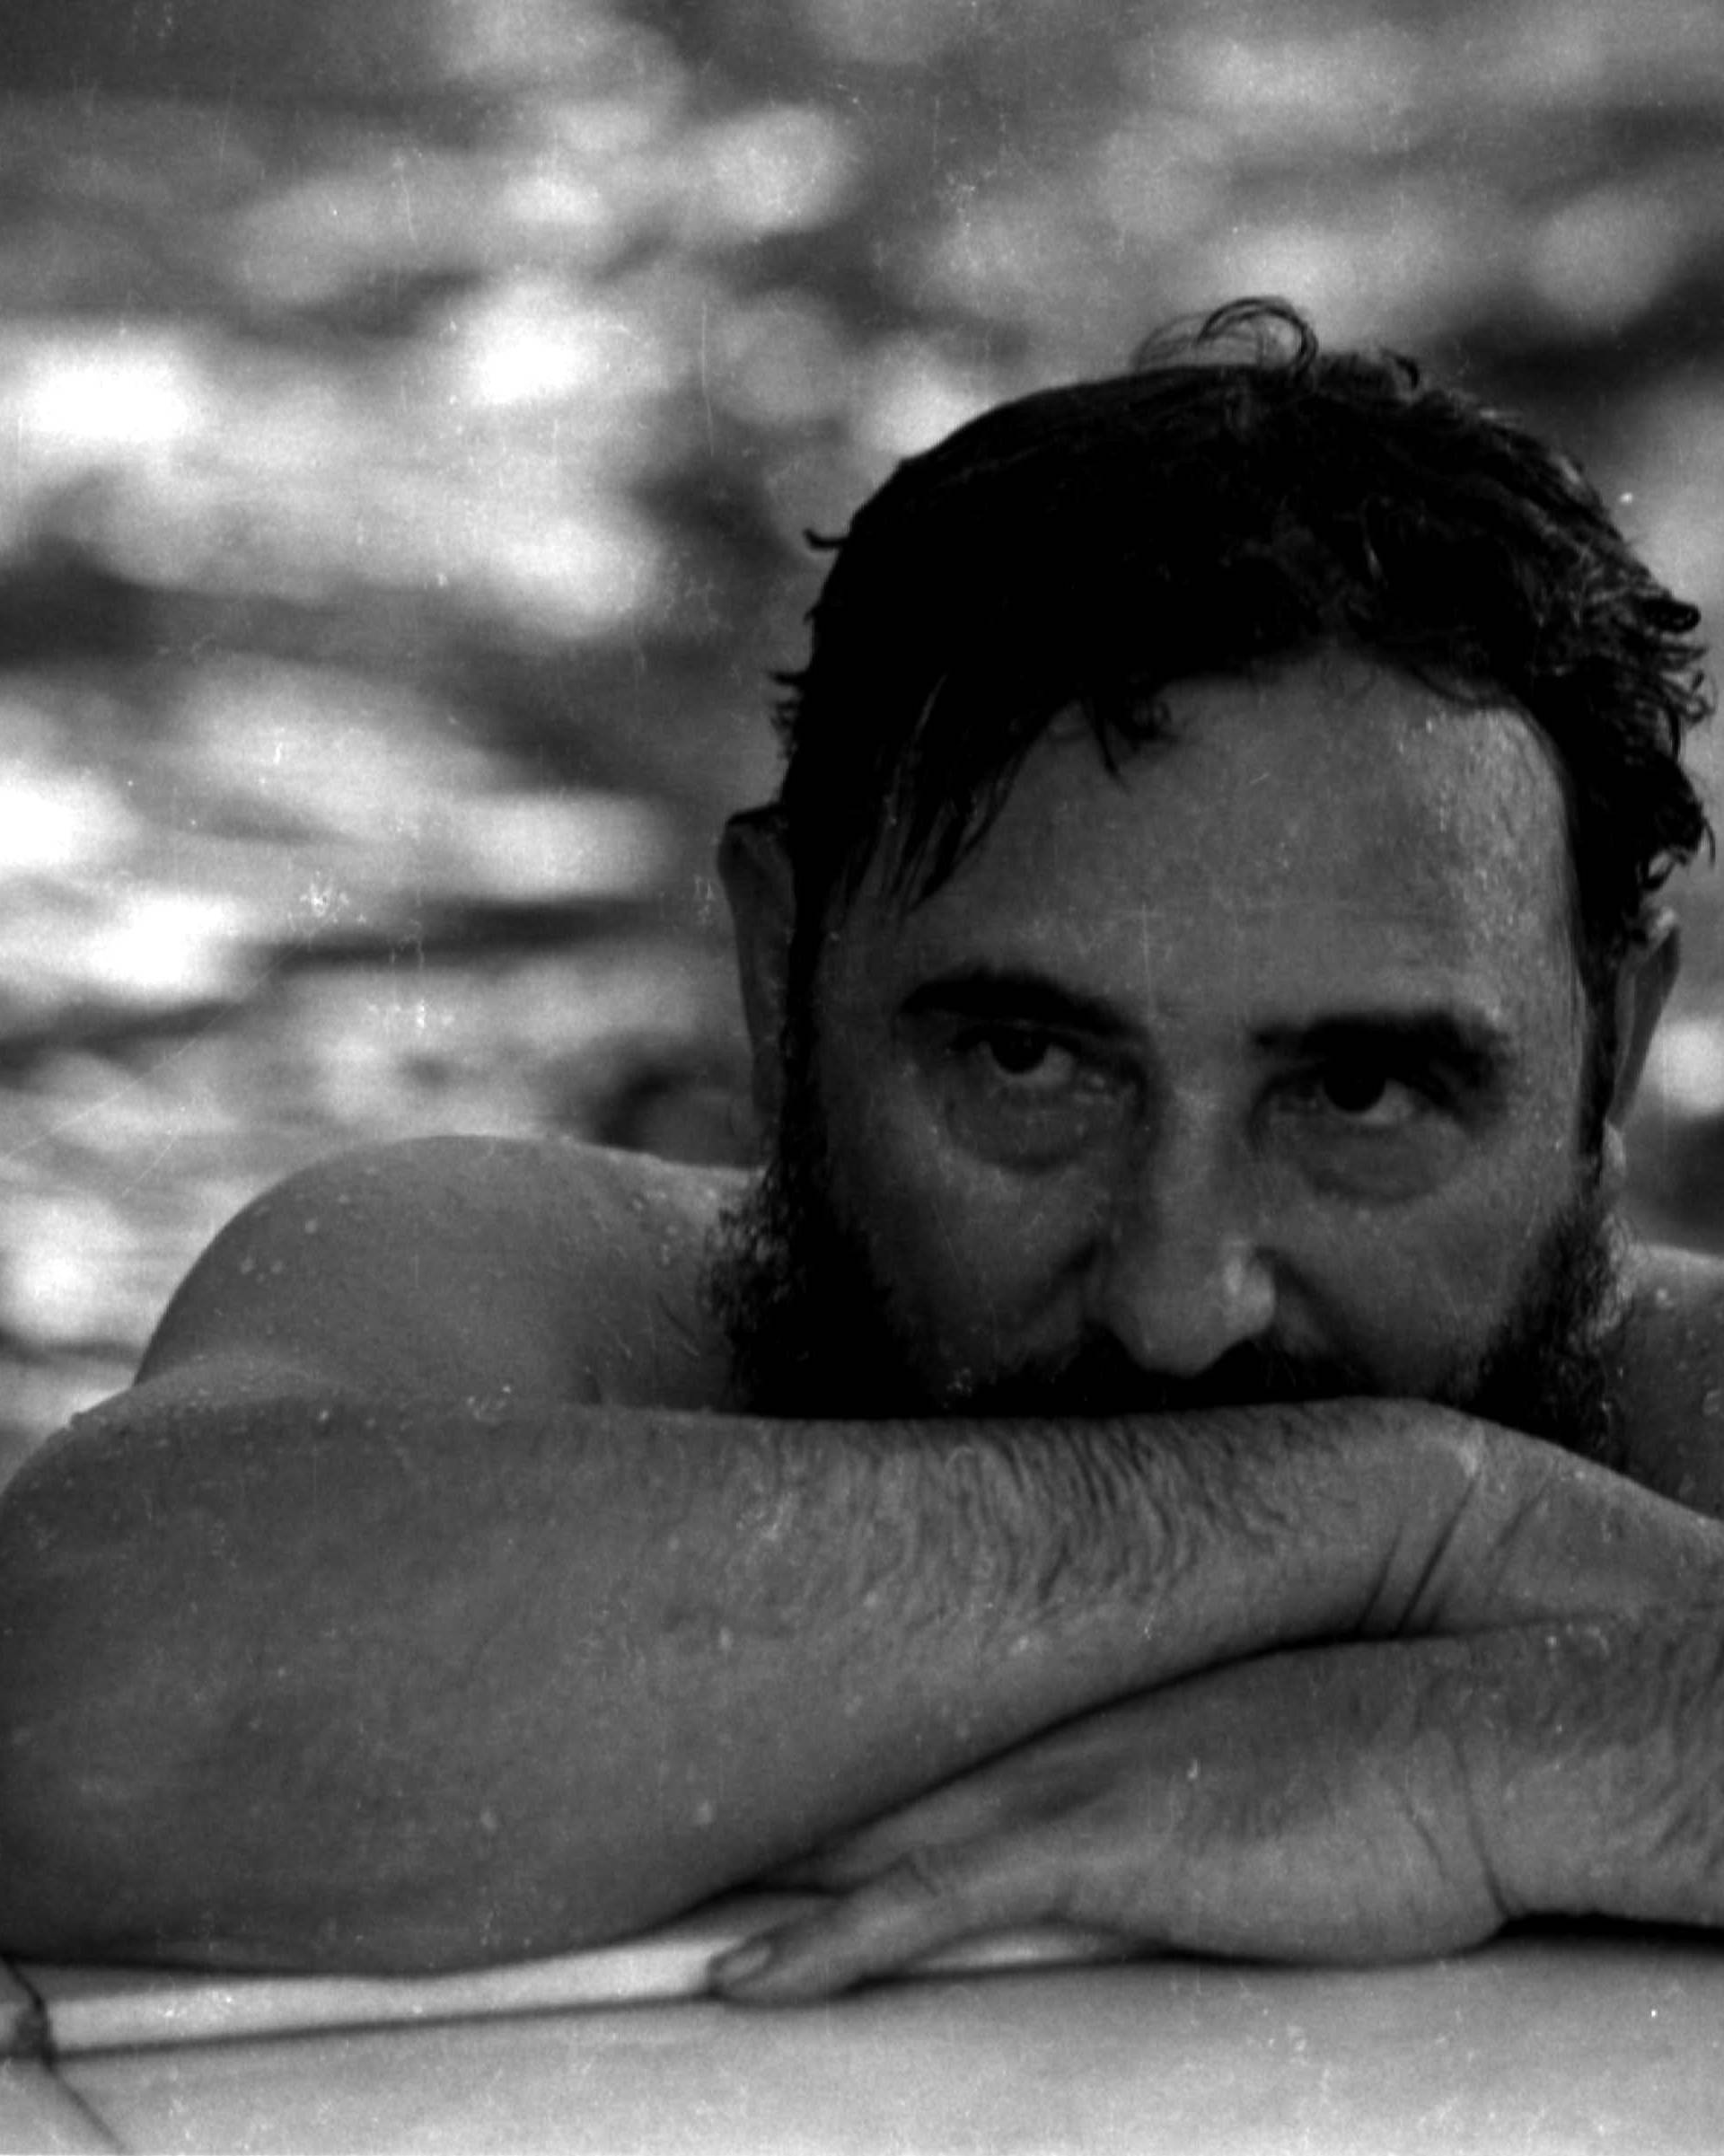 File photo of then Cuban Prime Minister Fidel Castro relaxing in a swimming pool during a visit to Romania